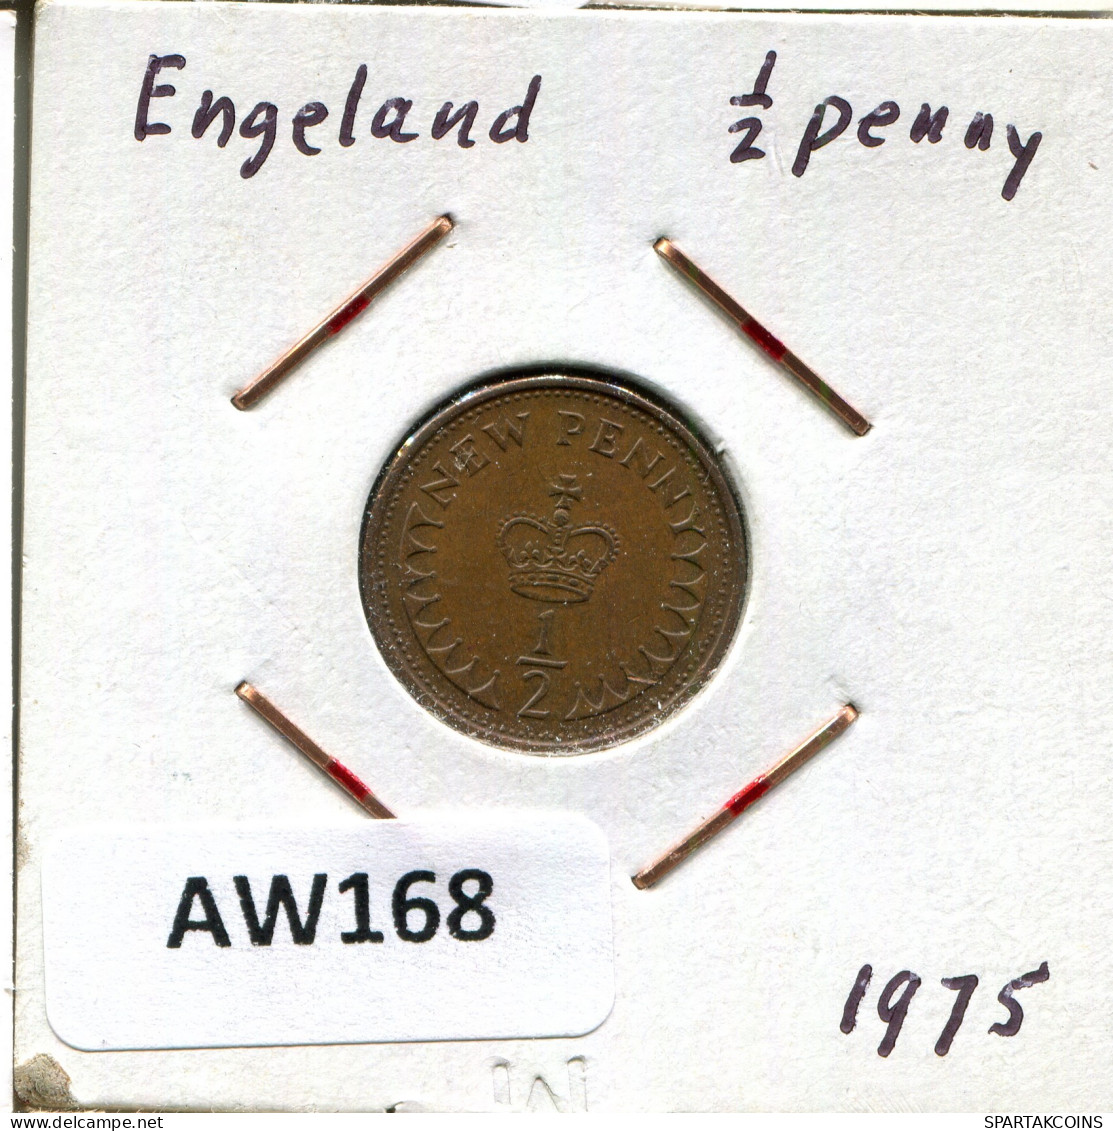 HALF PENNY 1975 UK GREAT BRITAIN Coin #AW168.U - 1/2 Penny & 1/2 New Penny